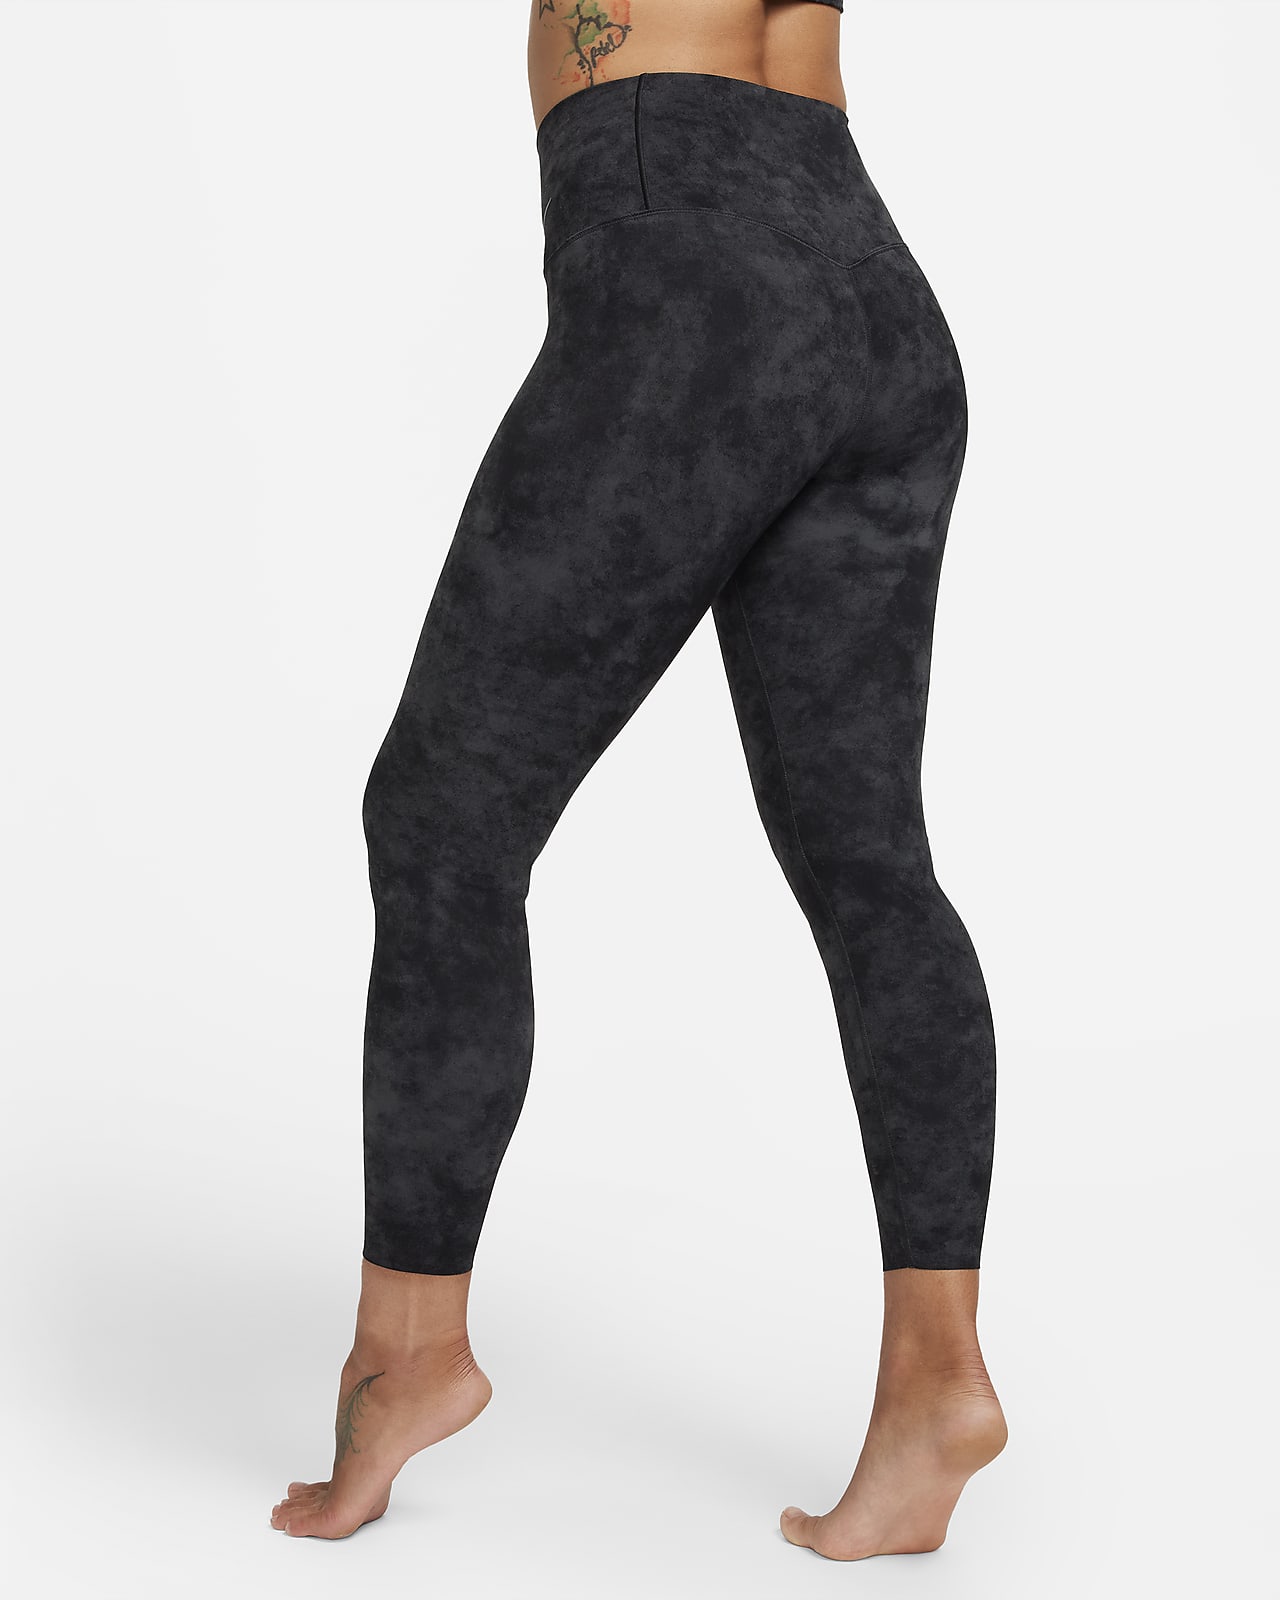 Nike Women's Zenvy Gentle-Support High-Waisted 7/8 Leggings in Brown -  ShopStyle Activewear Pants